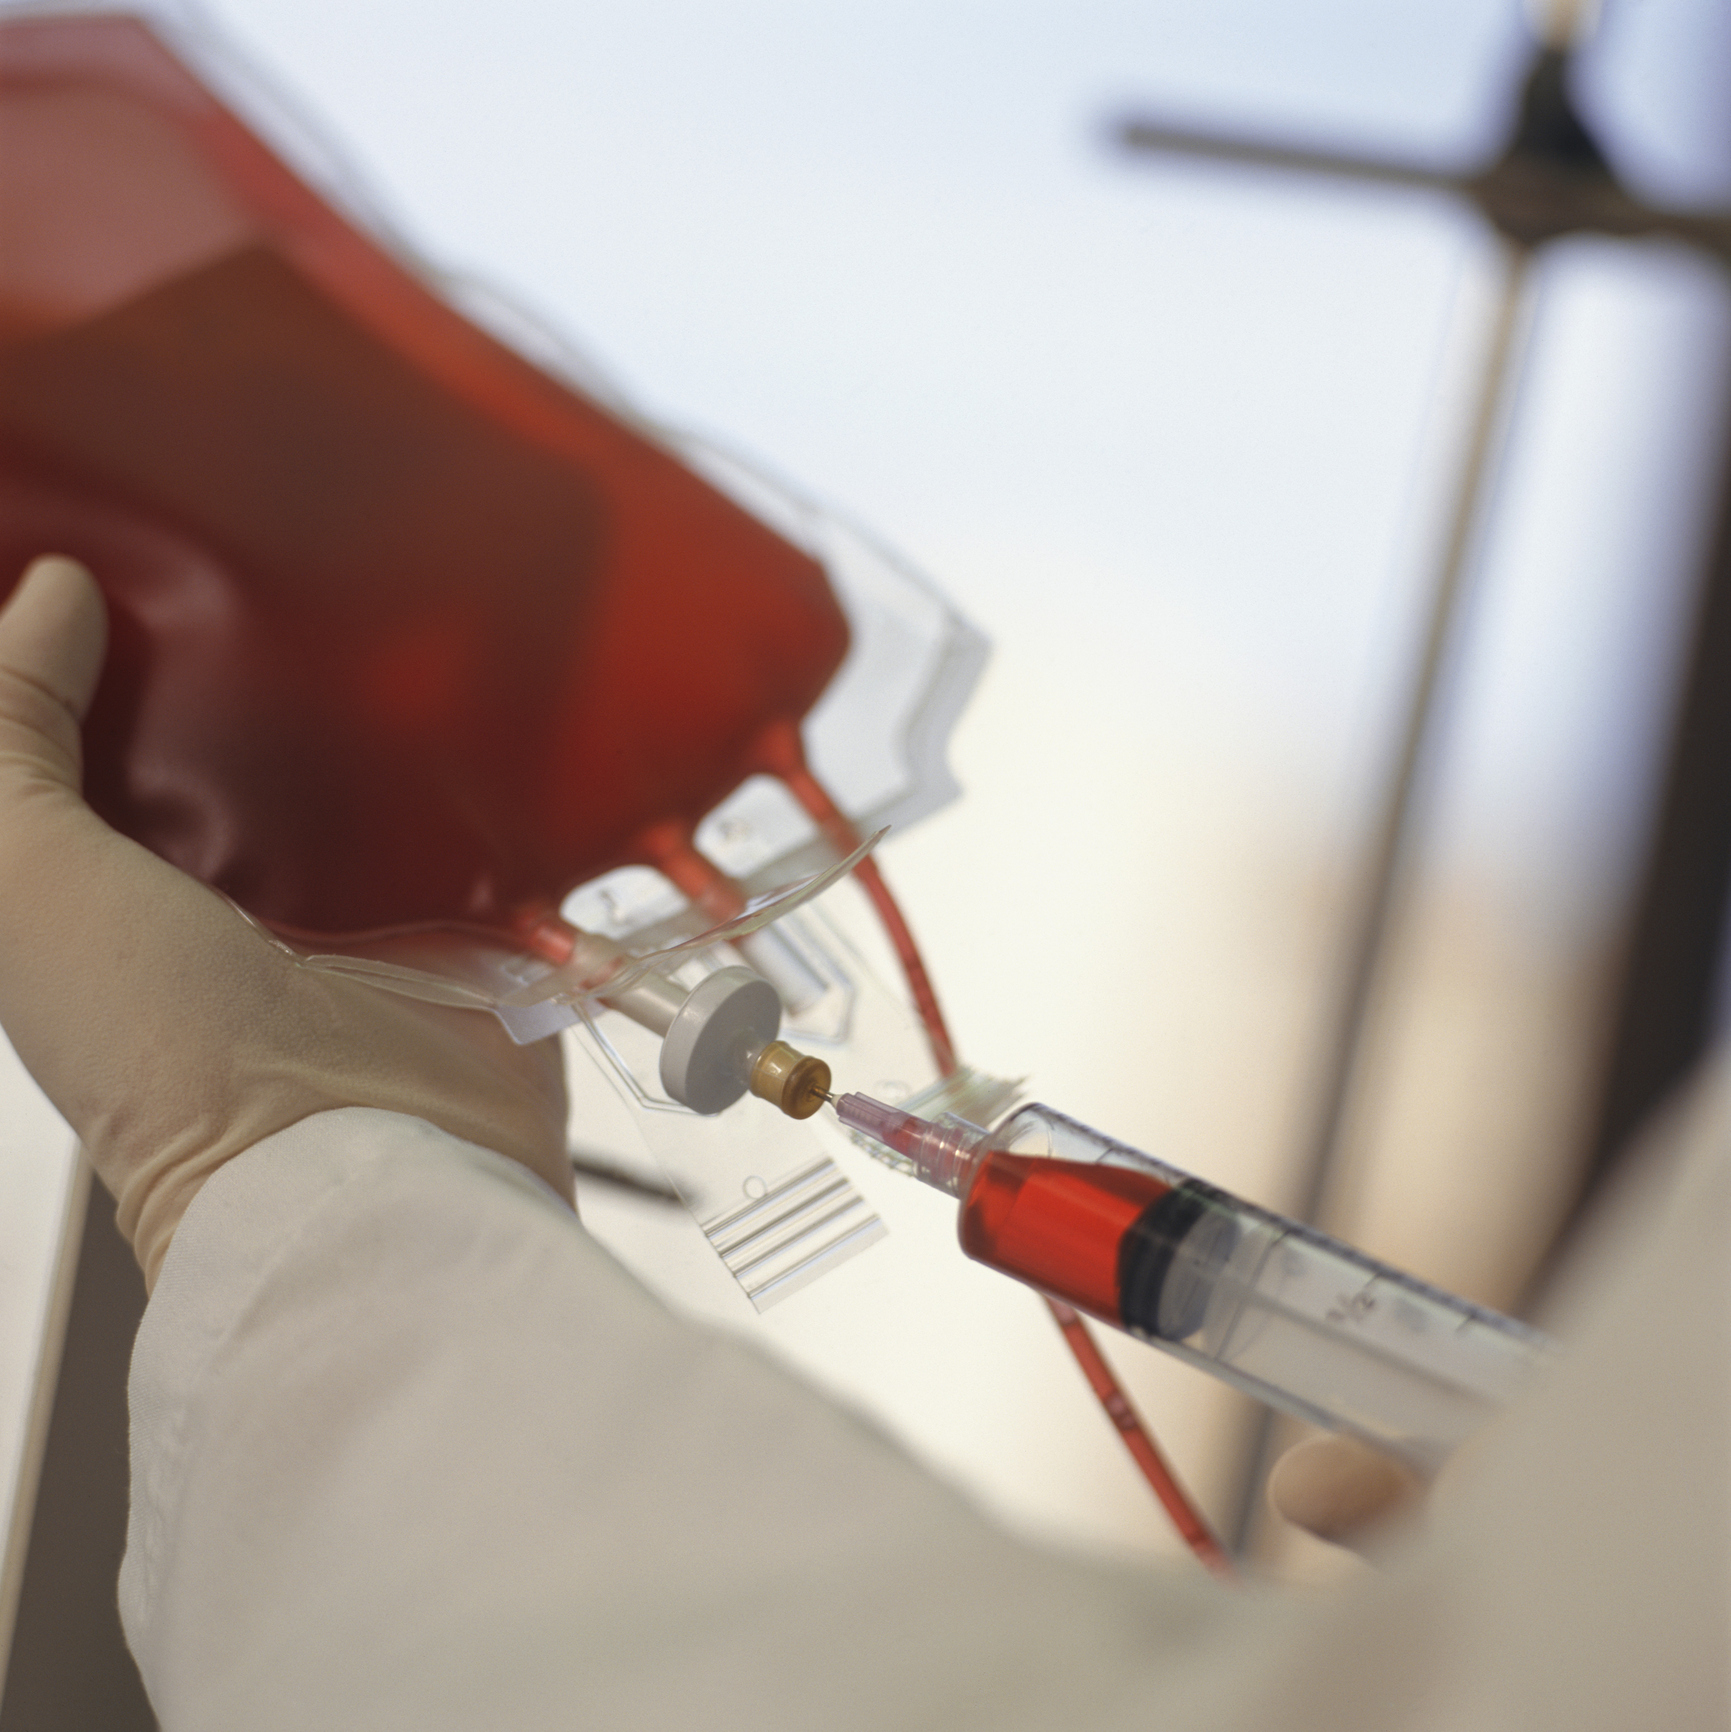 A technician draws blood with a syringe from a blood bag